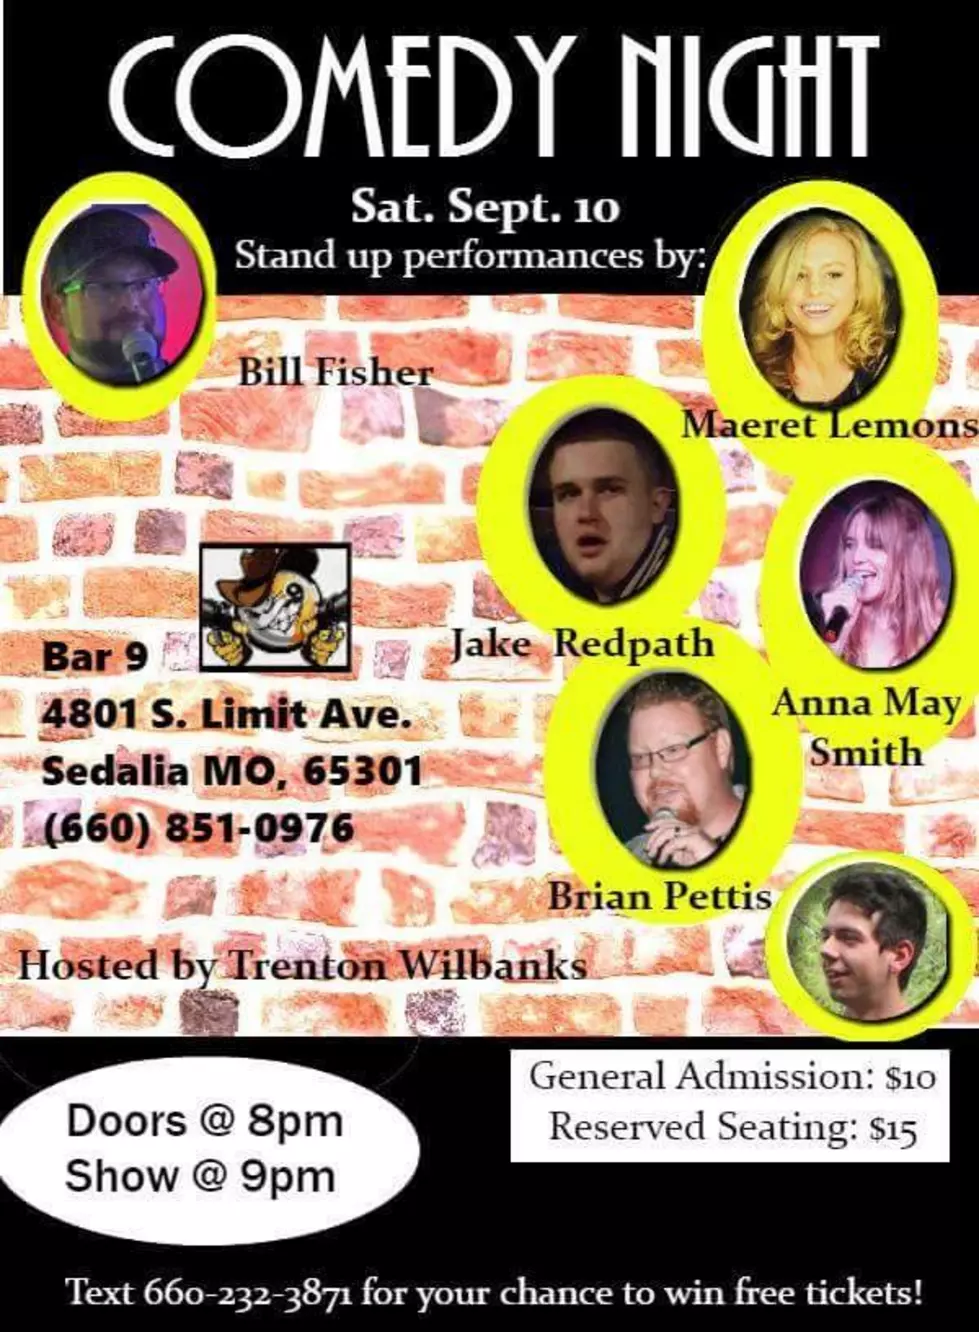 Comedy Night Comes to Sedalia:  Meet the Performers